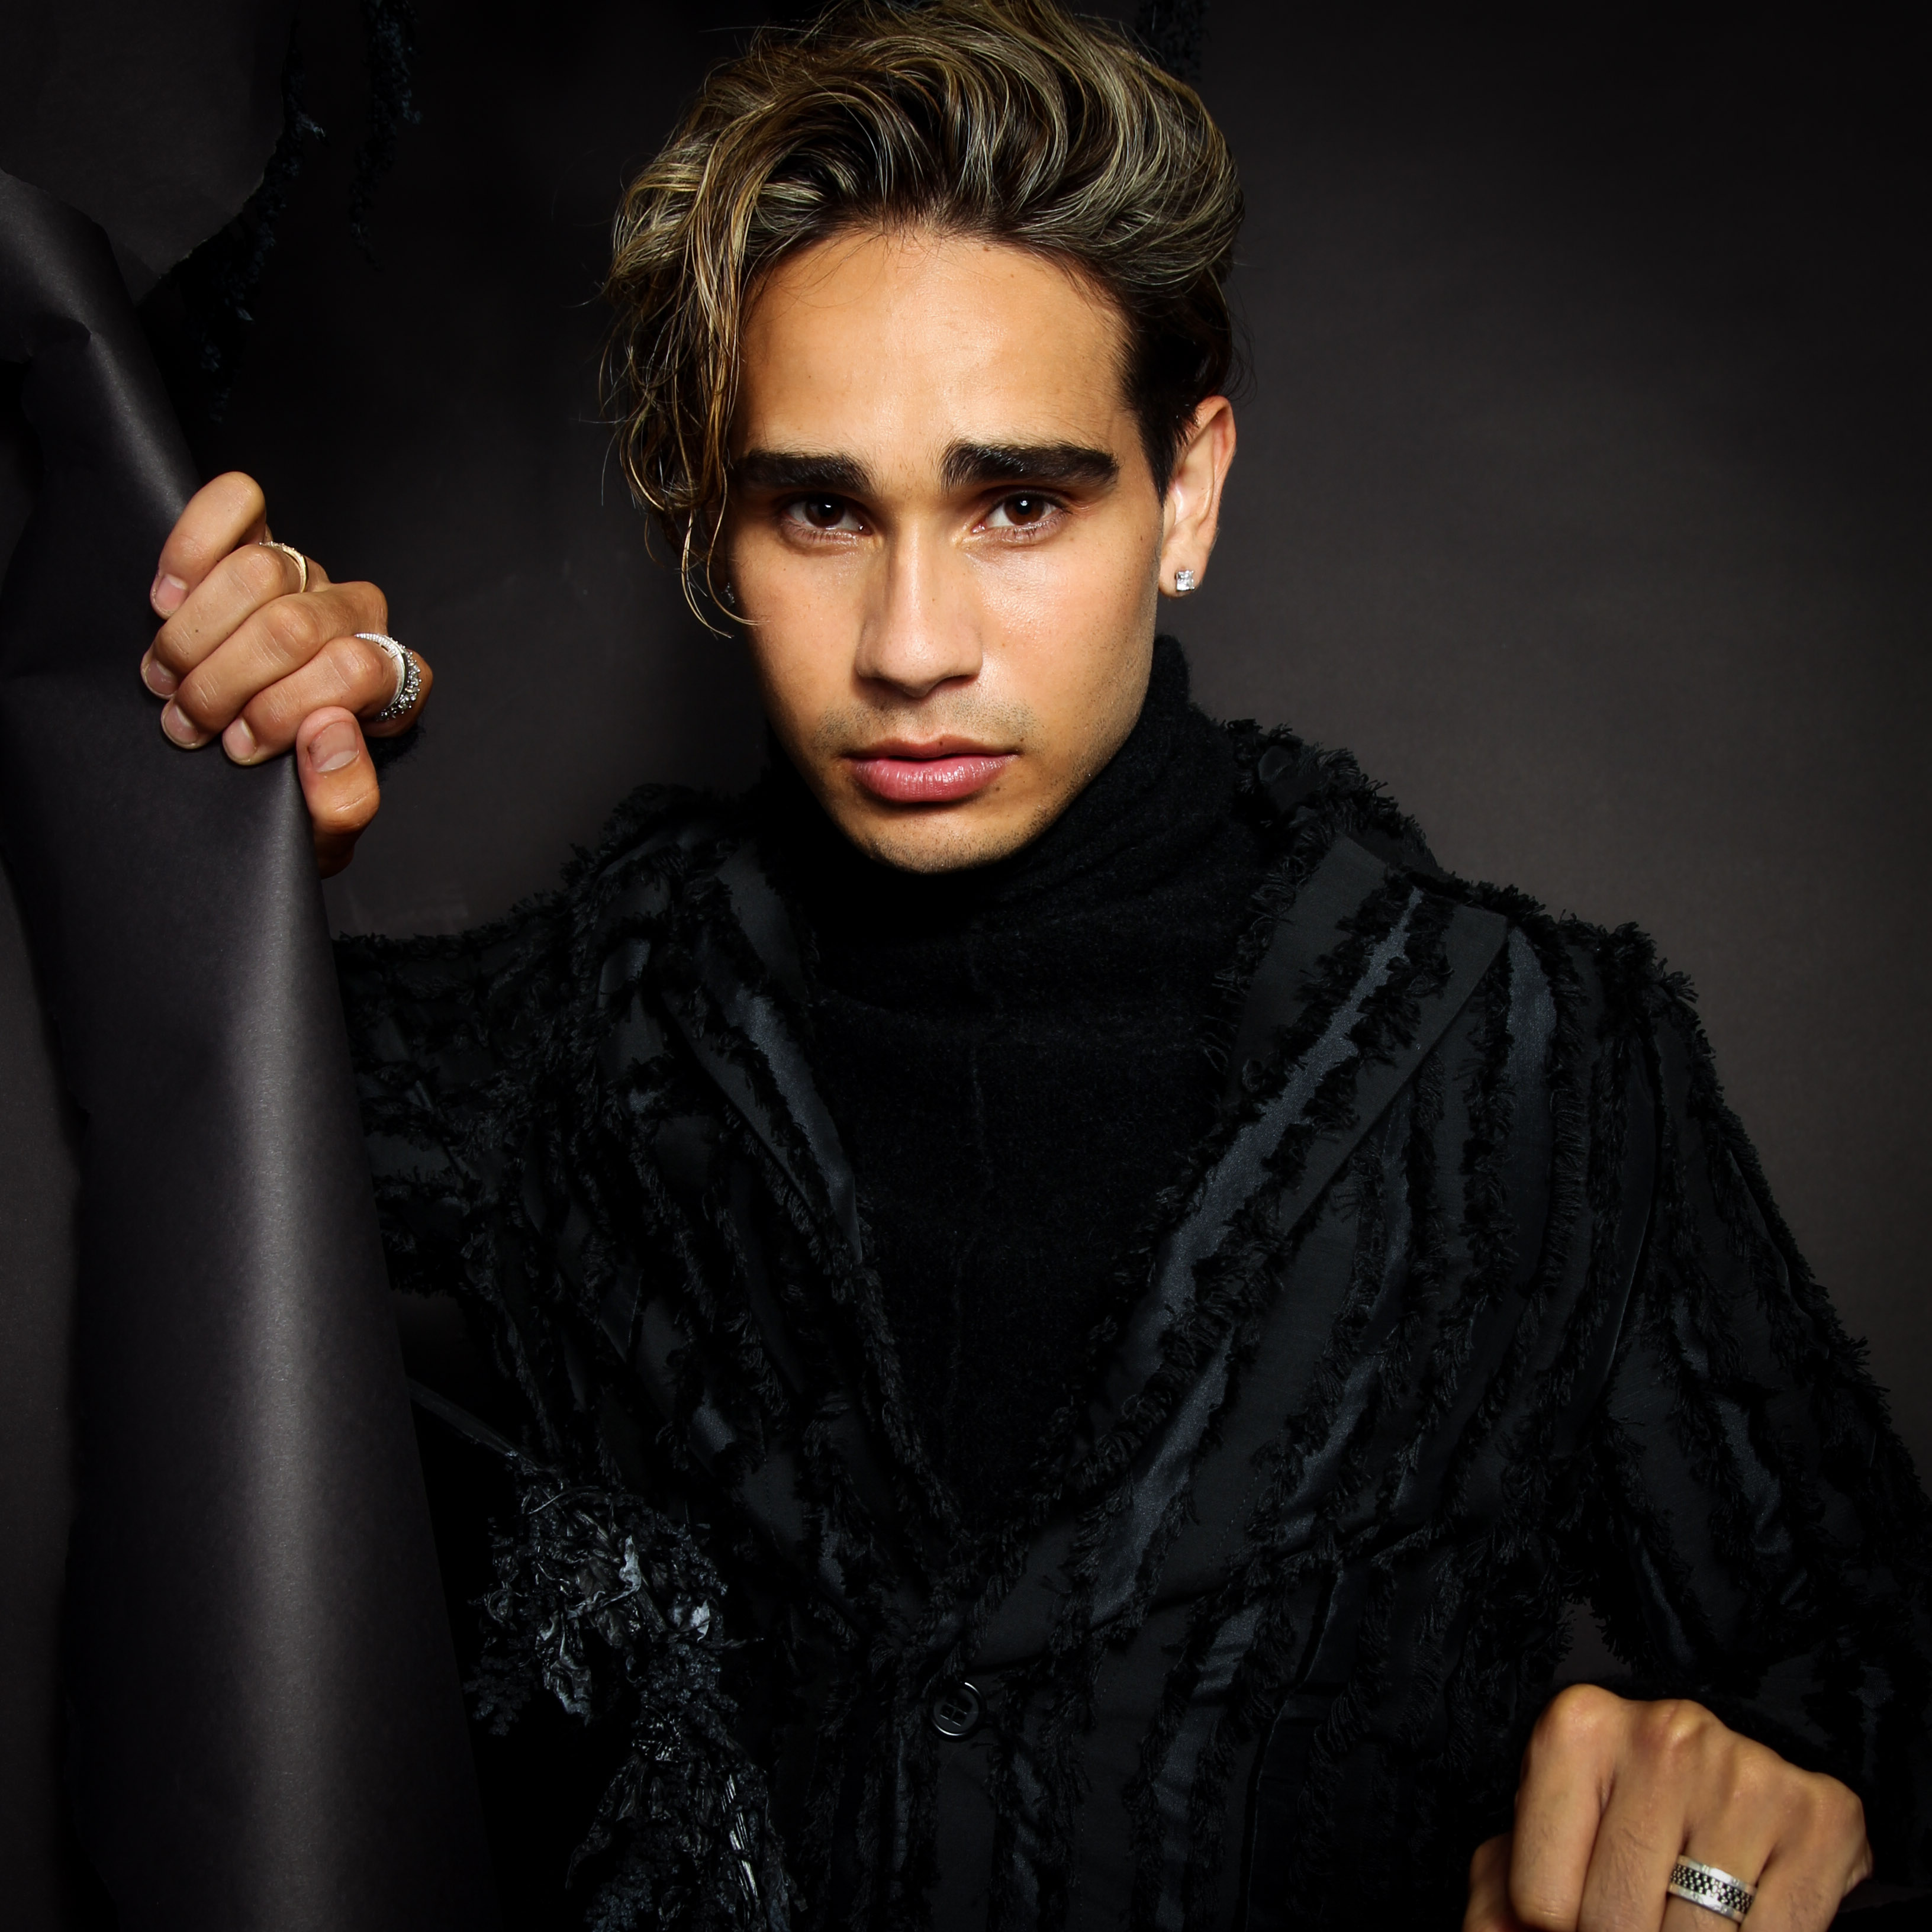 Isaiah Firebrace, a young Aboriginal man with blond-streaked dark hair, wears a black furry coat and looks into the camera with a serious expression. He is holding a piece of black fabric and the background is also black.